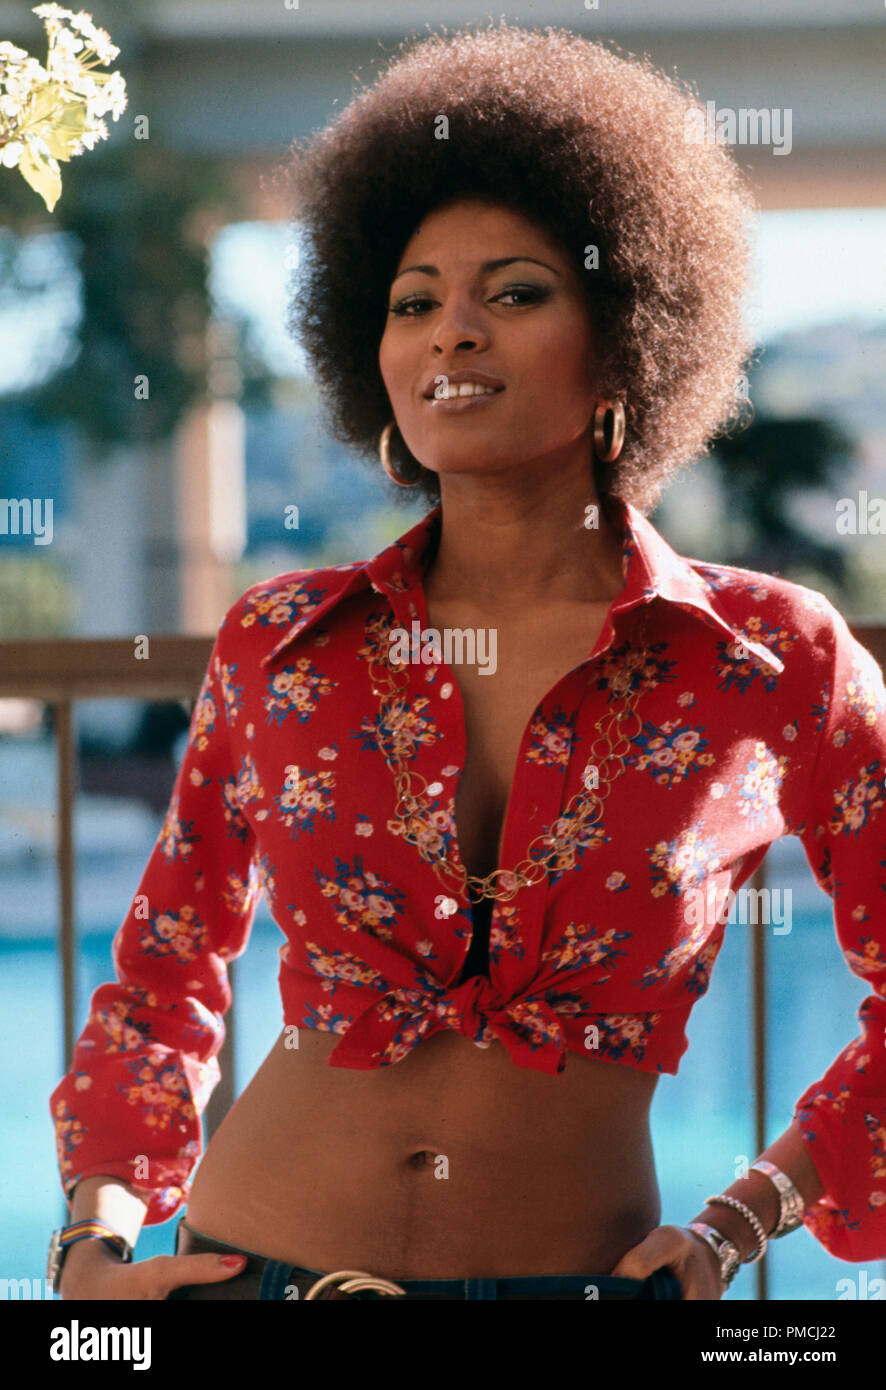 pam-grier-coffy-1973-american-international-pictures-file-reference-33650-165tha-for-editorial-use-only-all-rights-reserved-PMCJ22.jpg